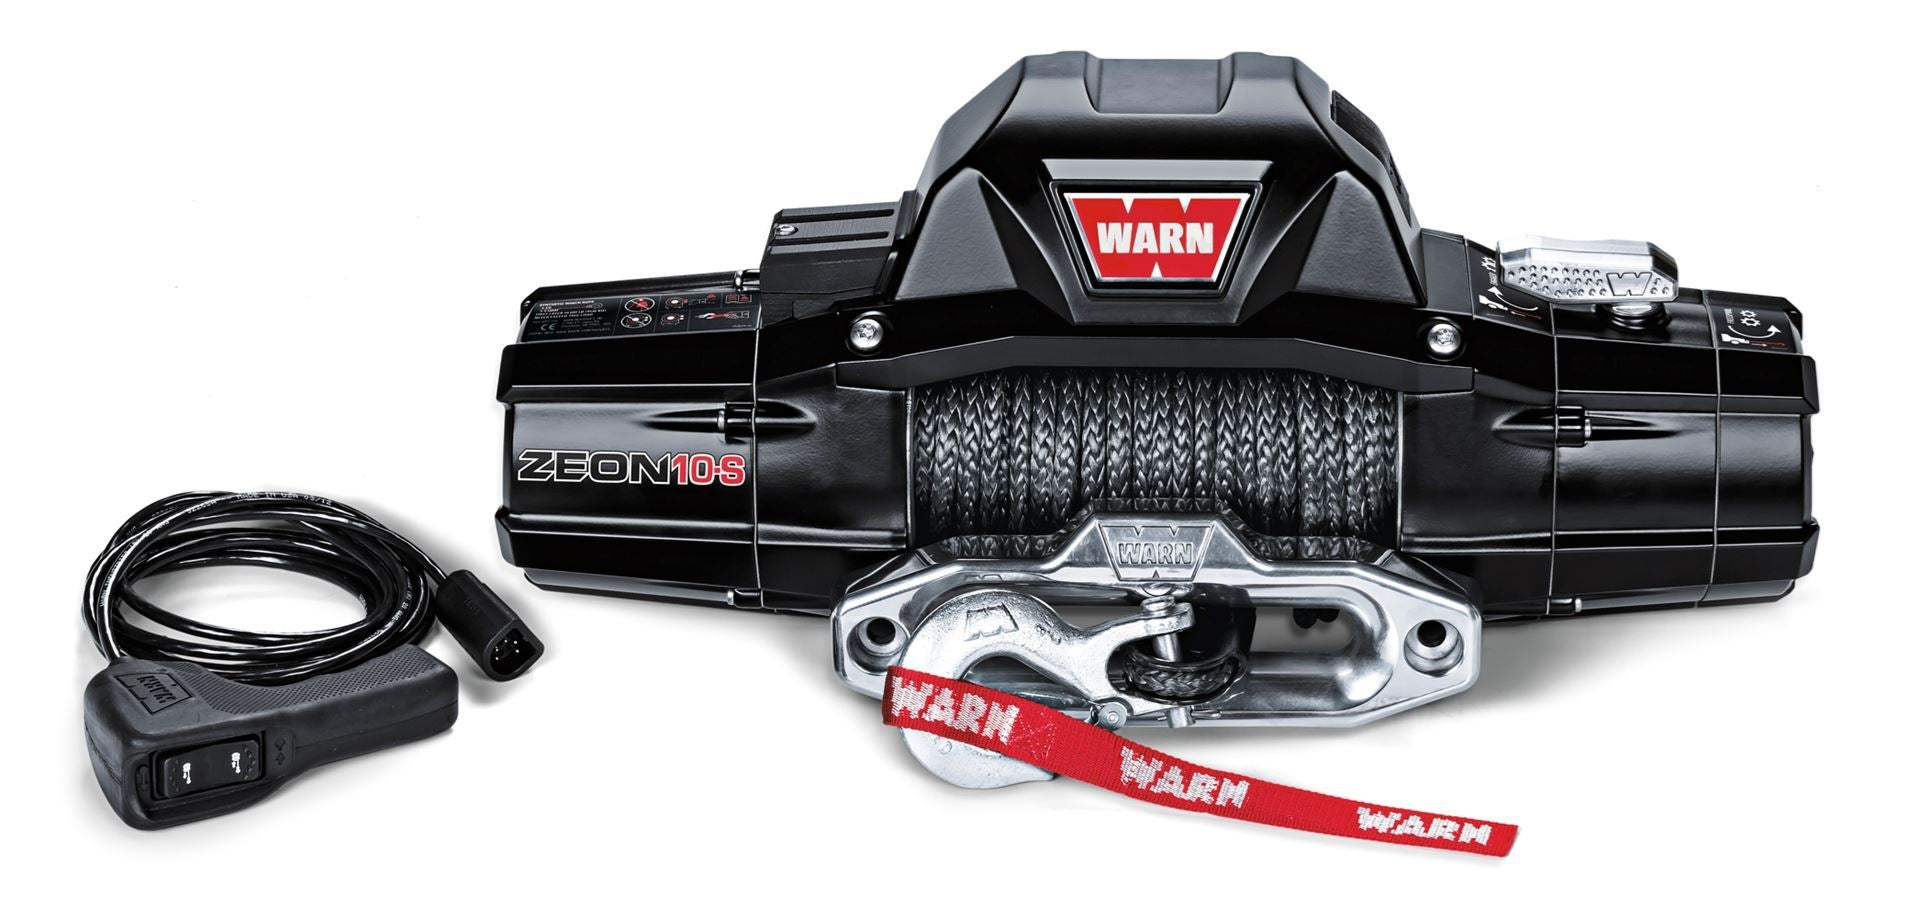 Warn Zeon 10 12v Electric Winch with Steel Rope close up